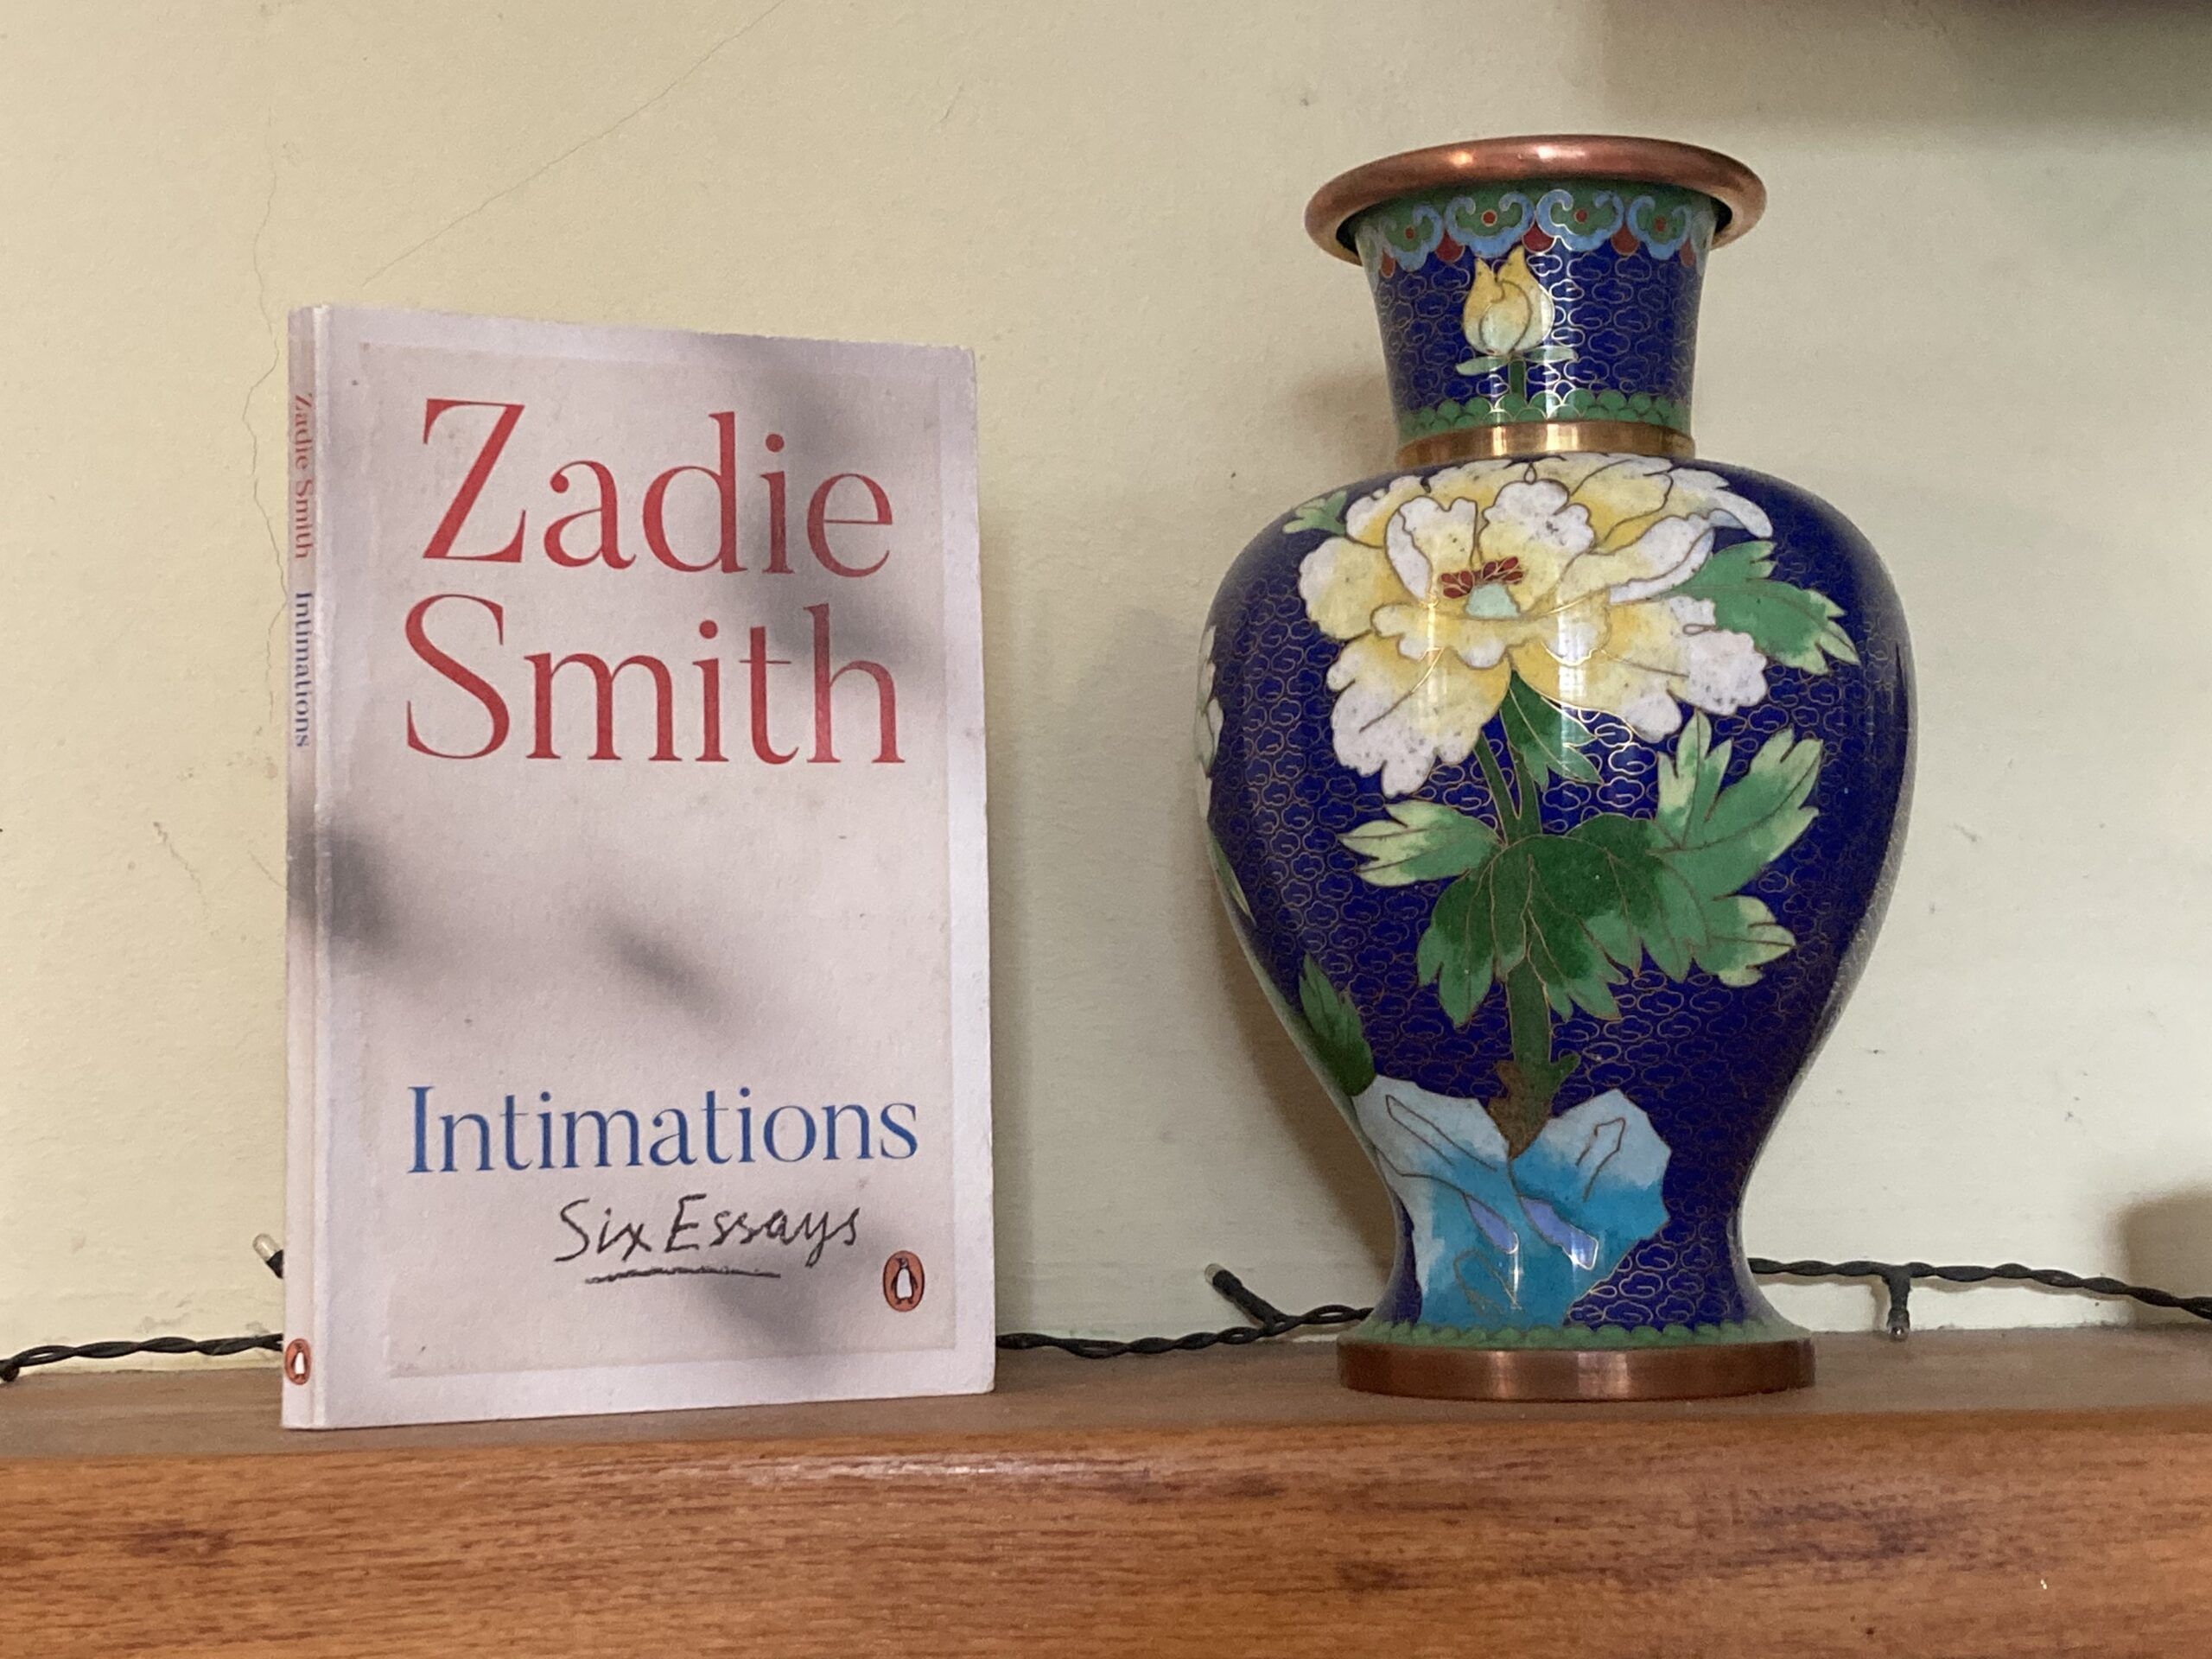 Intimations by Zadie Smith on a shelf next to a vase